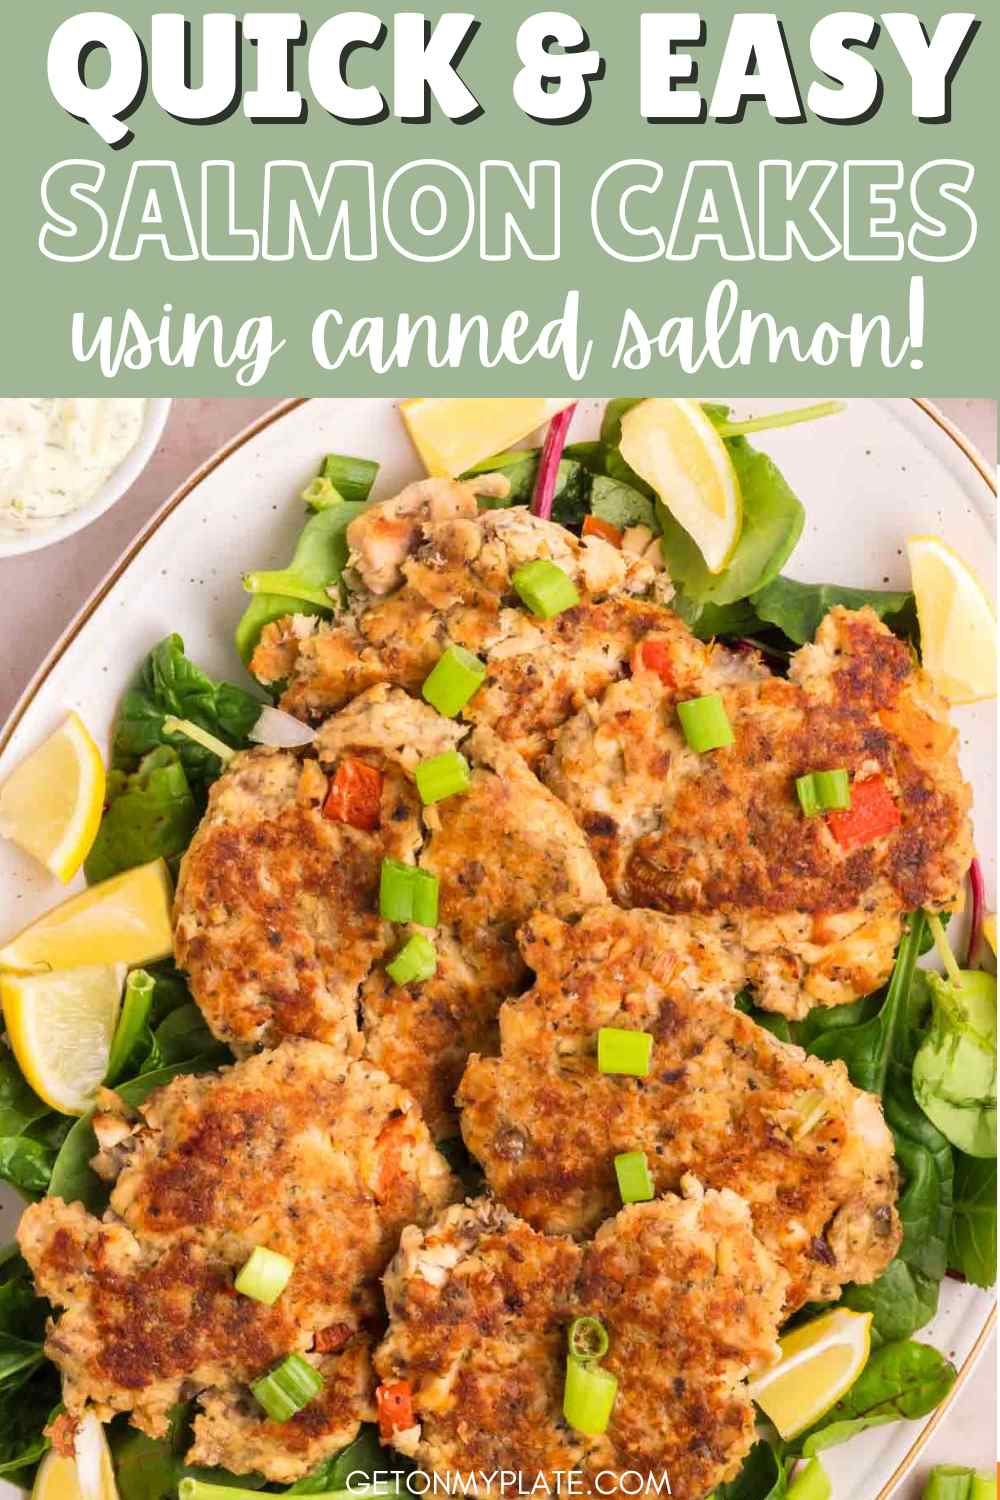 Pinterest pin showing salmon patties on a serving dish.